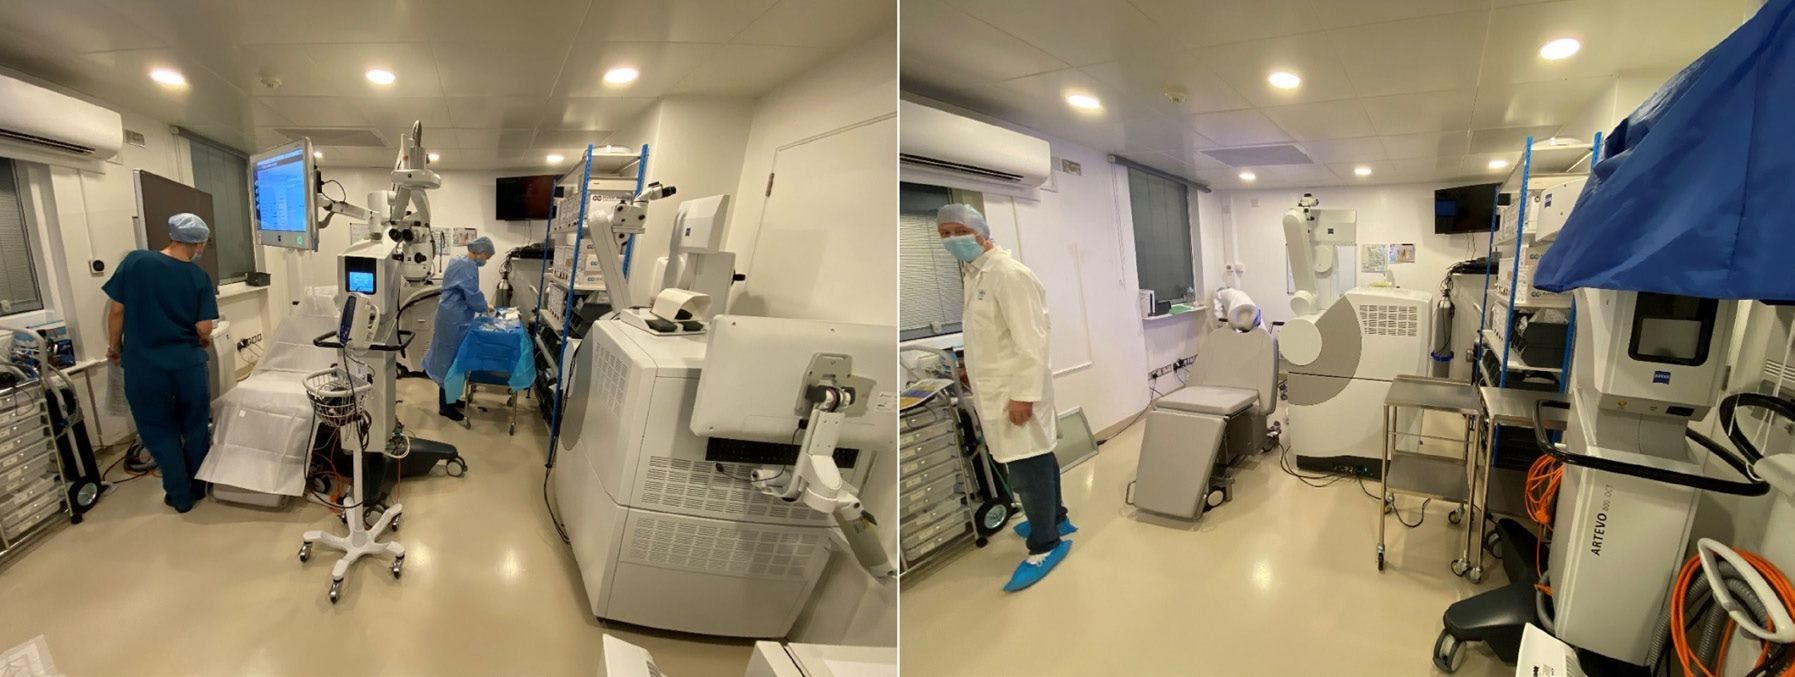 Figure 1. (Left) Operating room setup for cataract surgery with the digital microscope ARTEVO® 800 while the VISUMAX 800 is tucked away in the corner. (Right) Later that afternoon the cataract equipment was moved to the side setting up the room for SMILE.